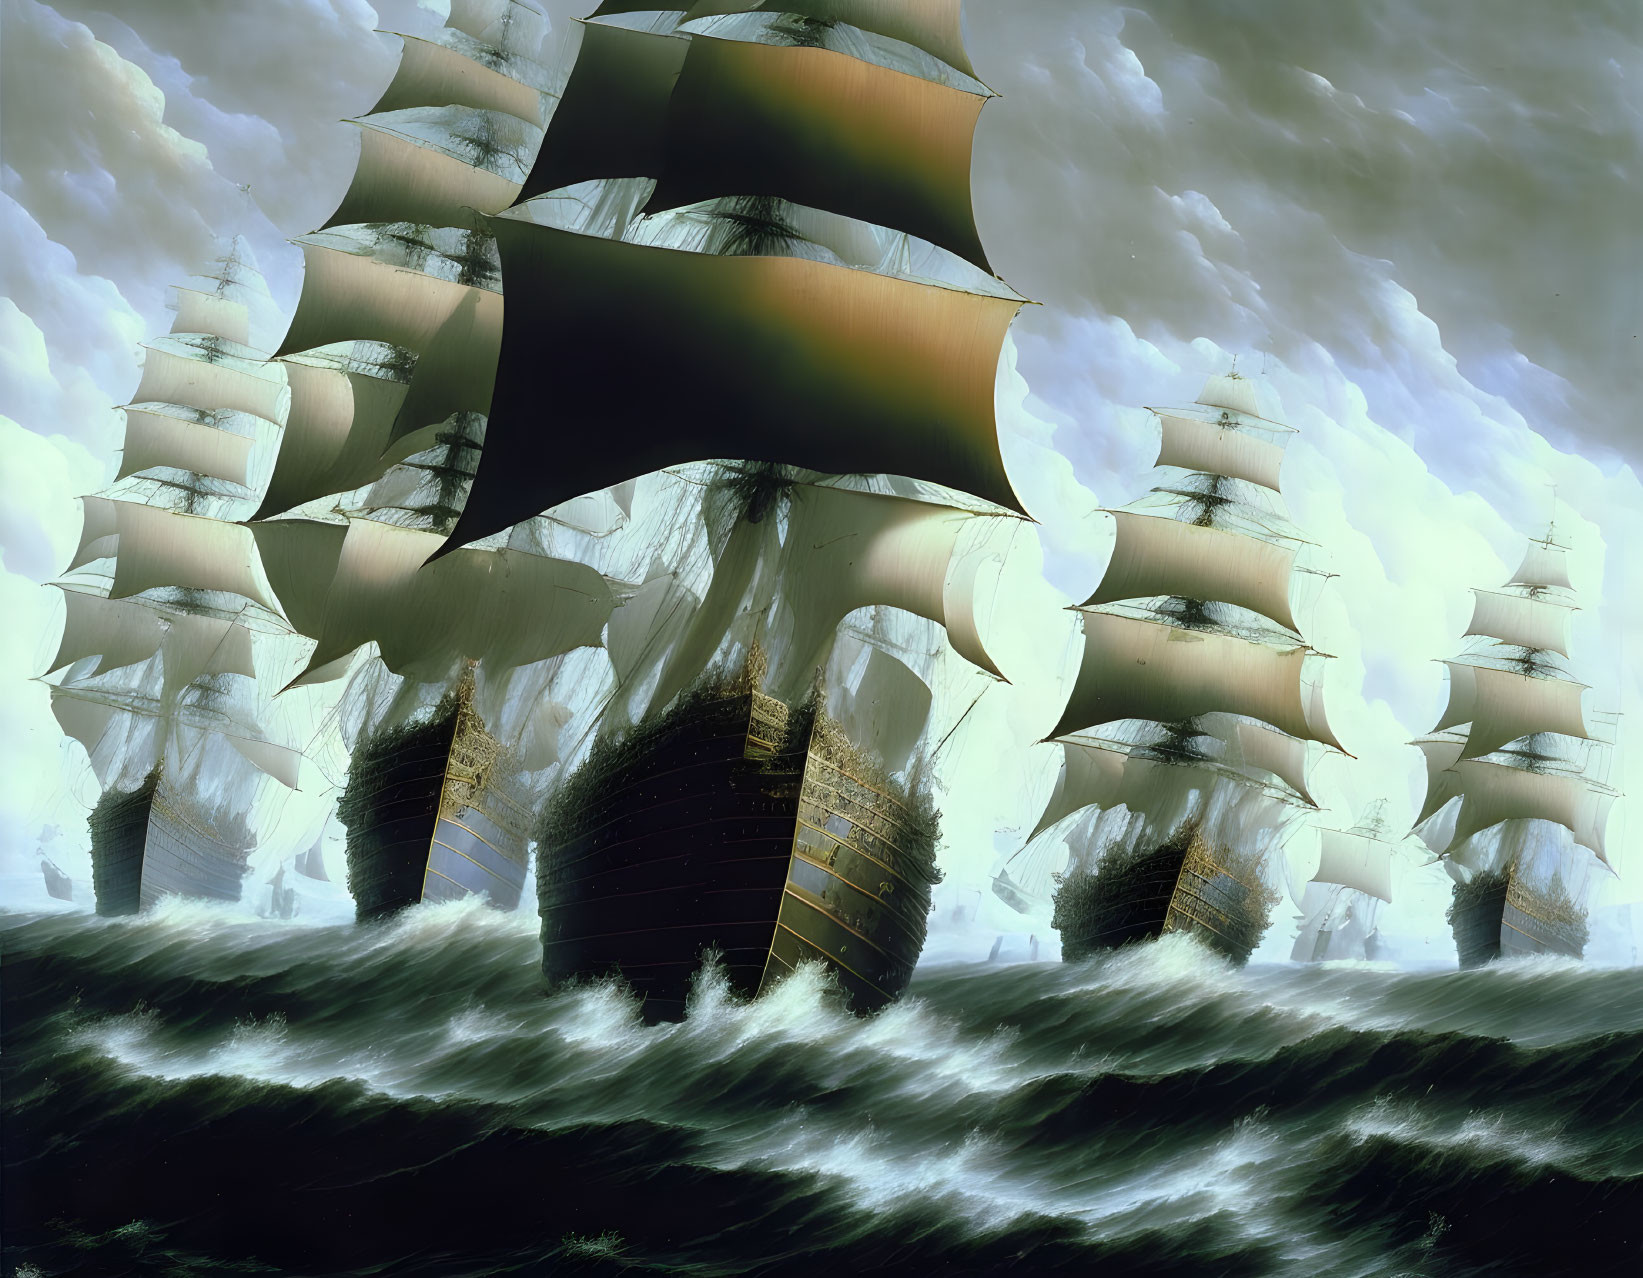 Clipper ships with billowing sails in turbulent seas under dark clouds